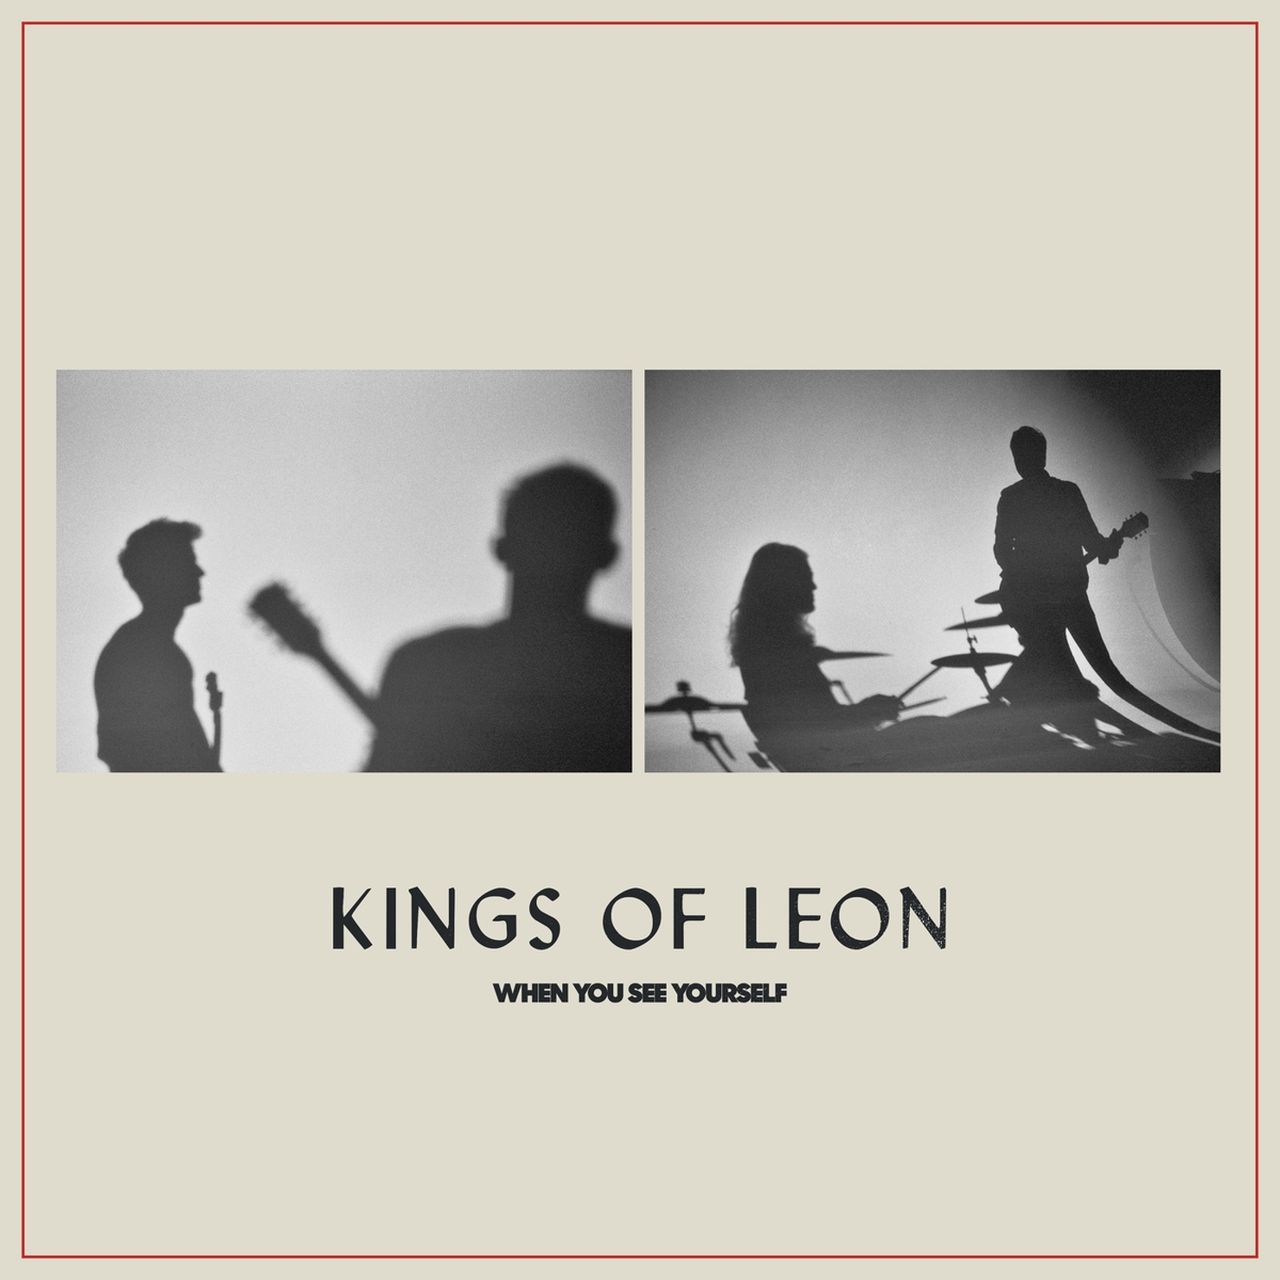 Kings Of Leon neues Album "When You See Yourself"